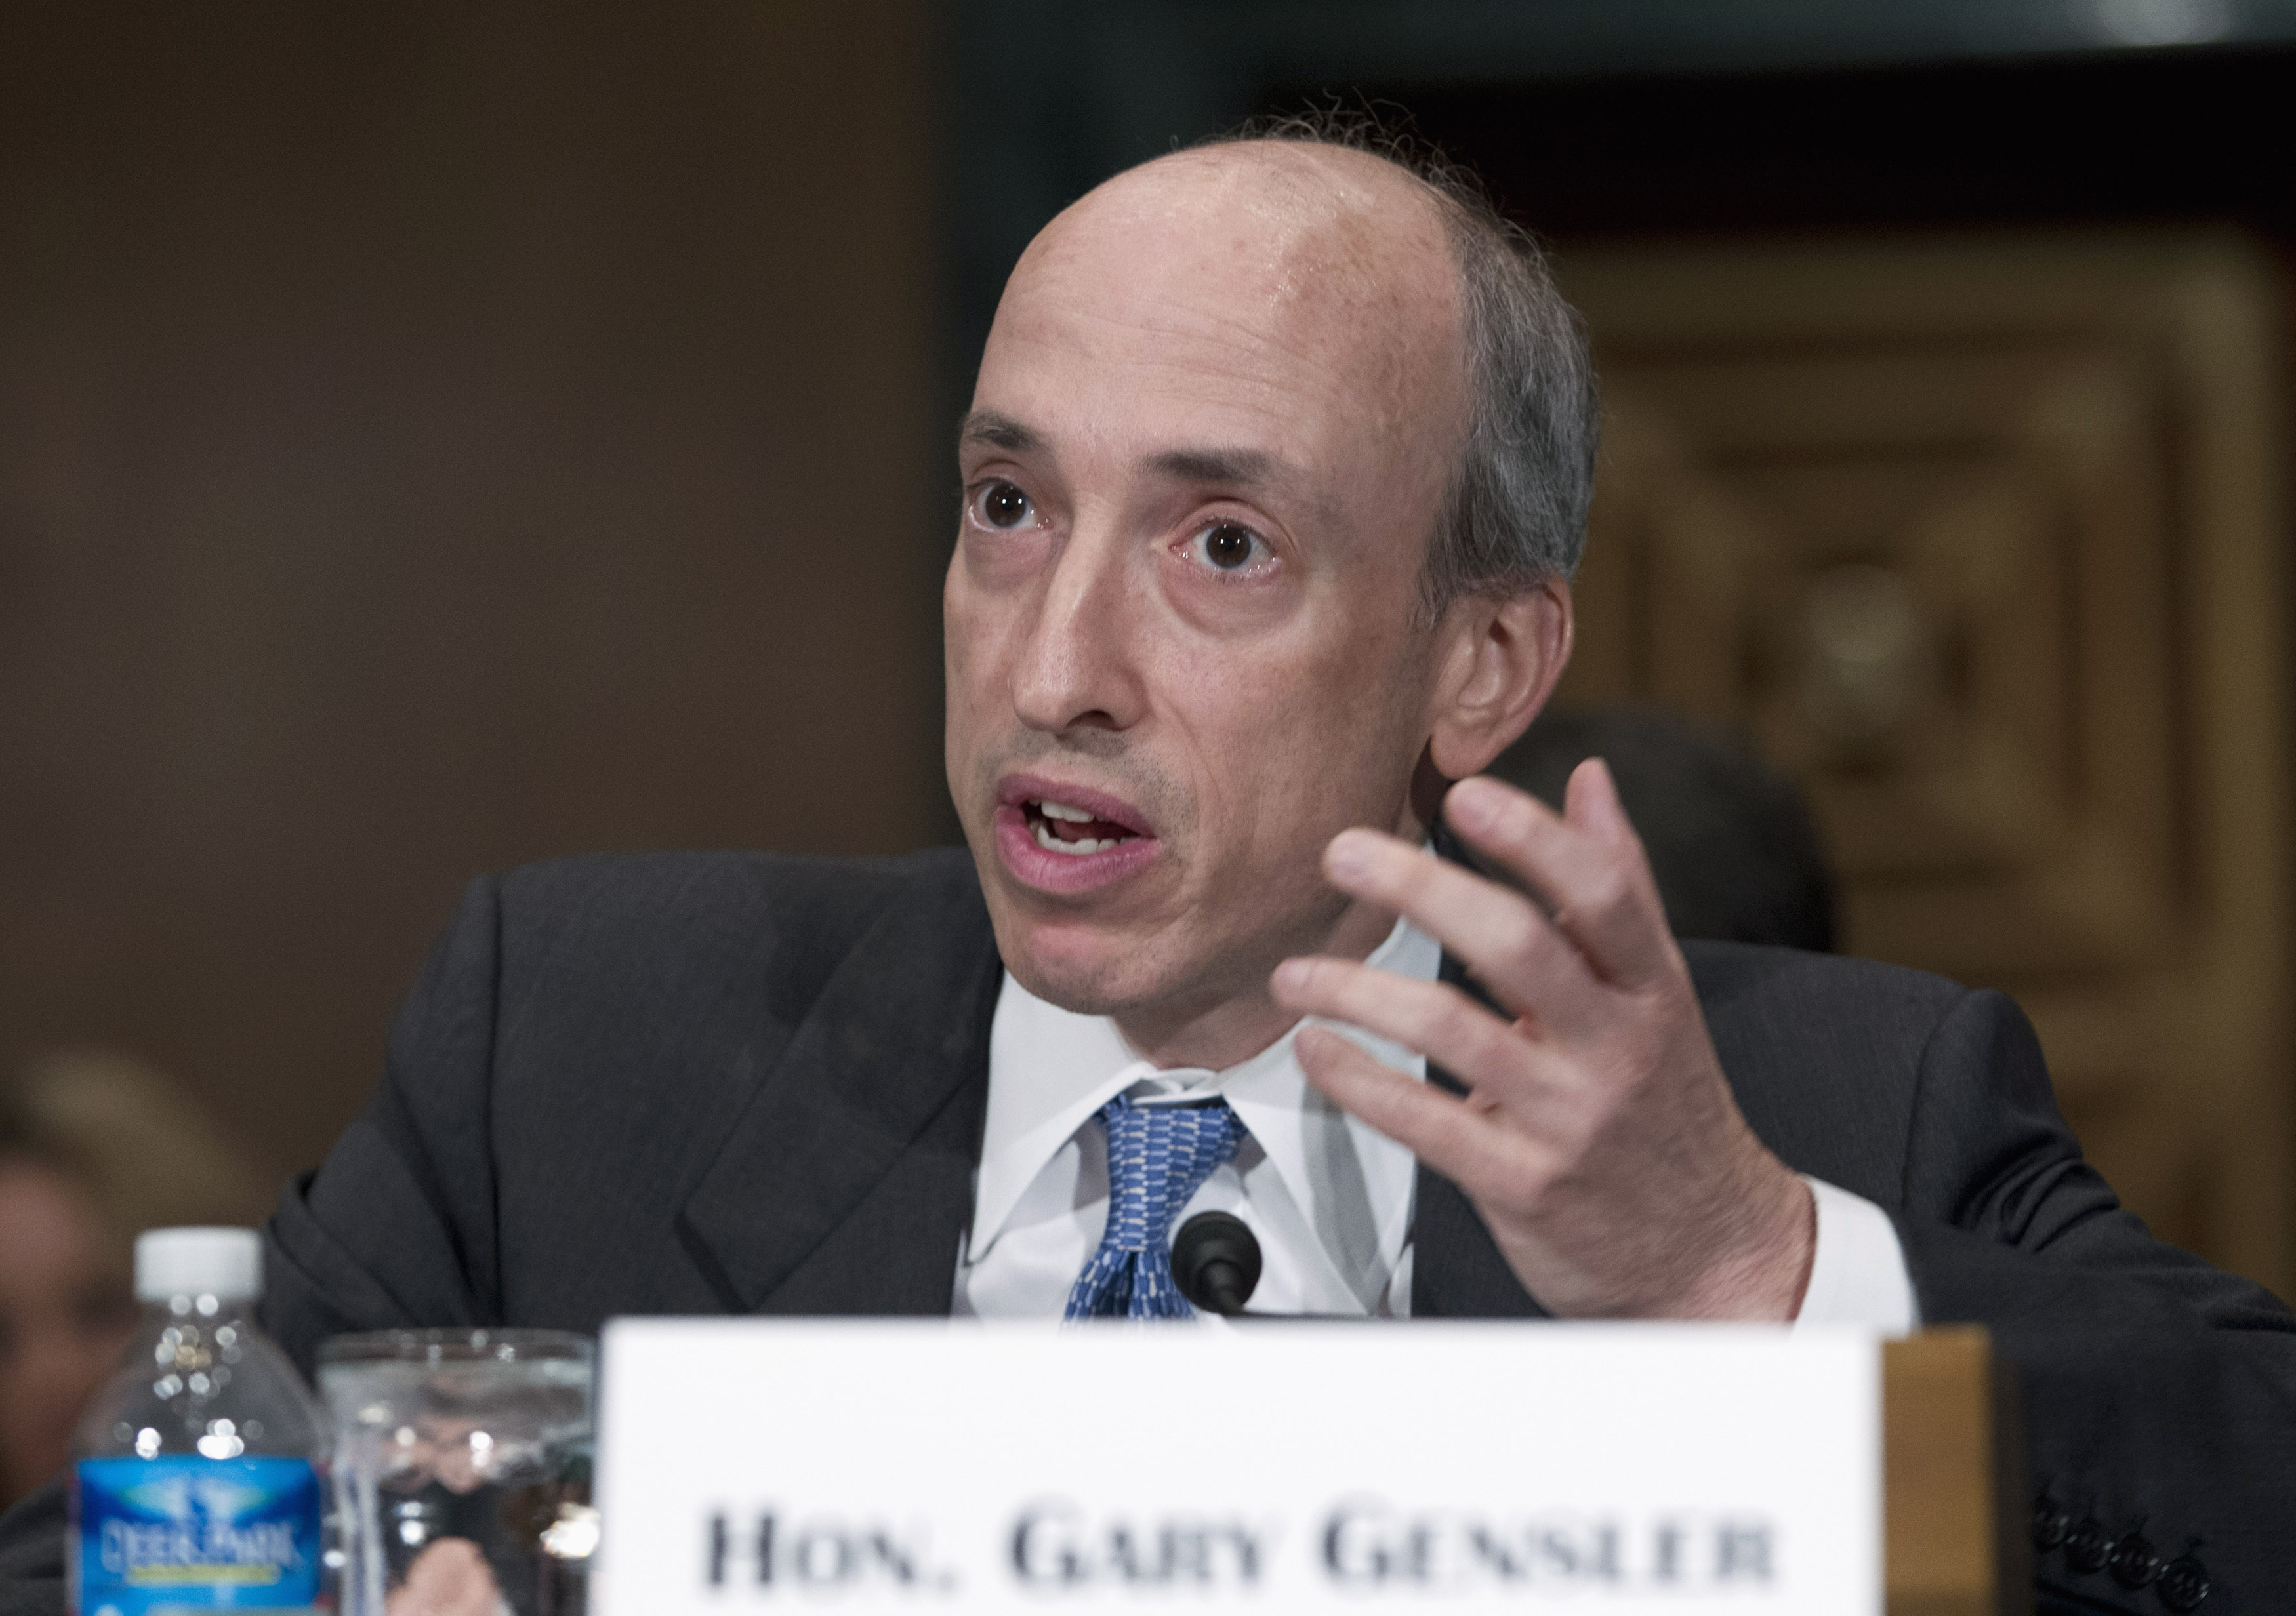 Commodity Futures Trading Commission Chair Gary Gensler testifies at a Senate Banking, Housing and Urban Affairs Committee hearing on Capitol Hill July 30, 2013. REUTERS/Jose Luis Magana (UNITED STATES - Tags: POLITICS BUSINESS)